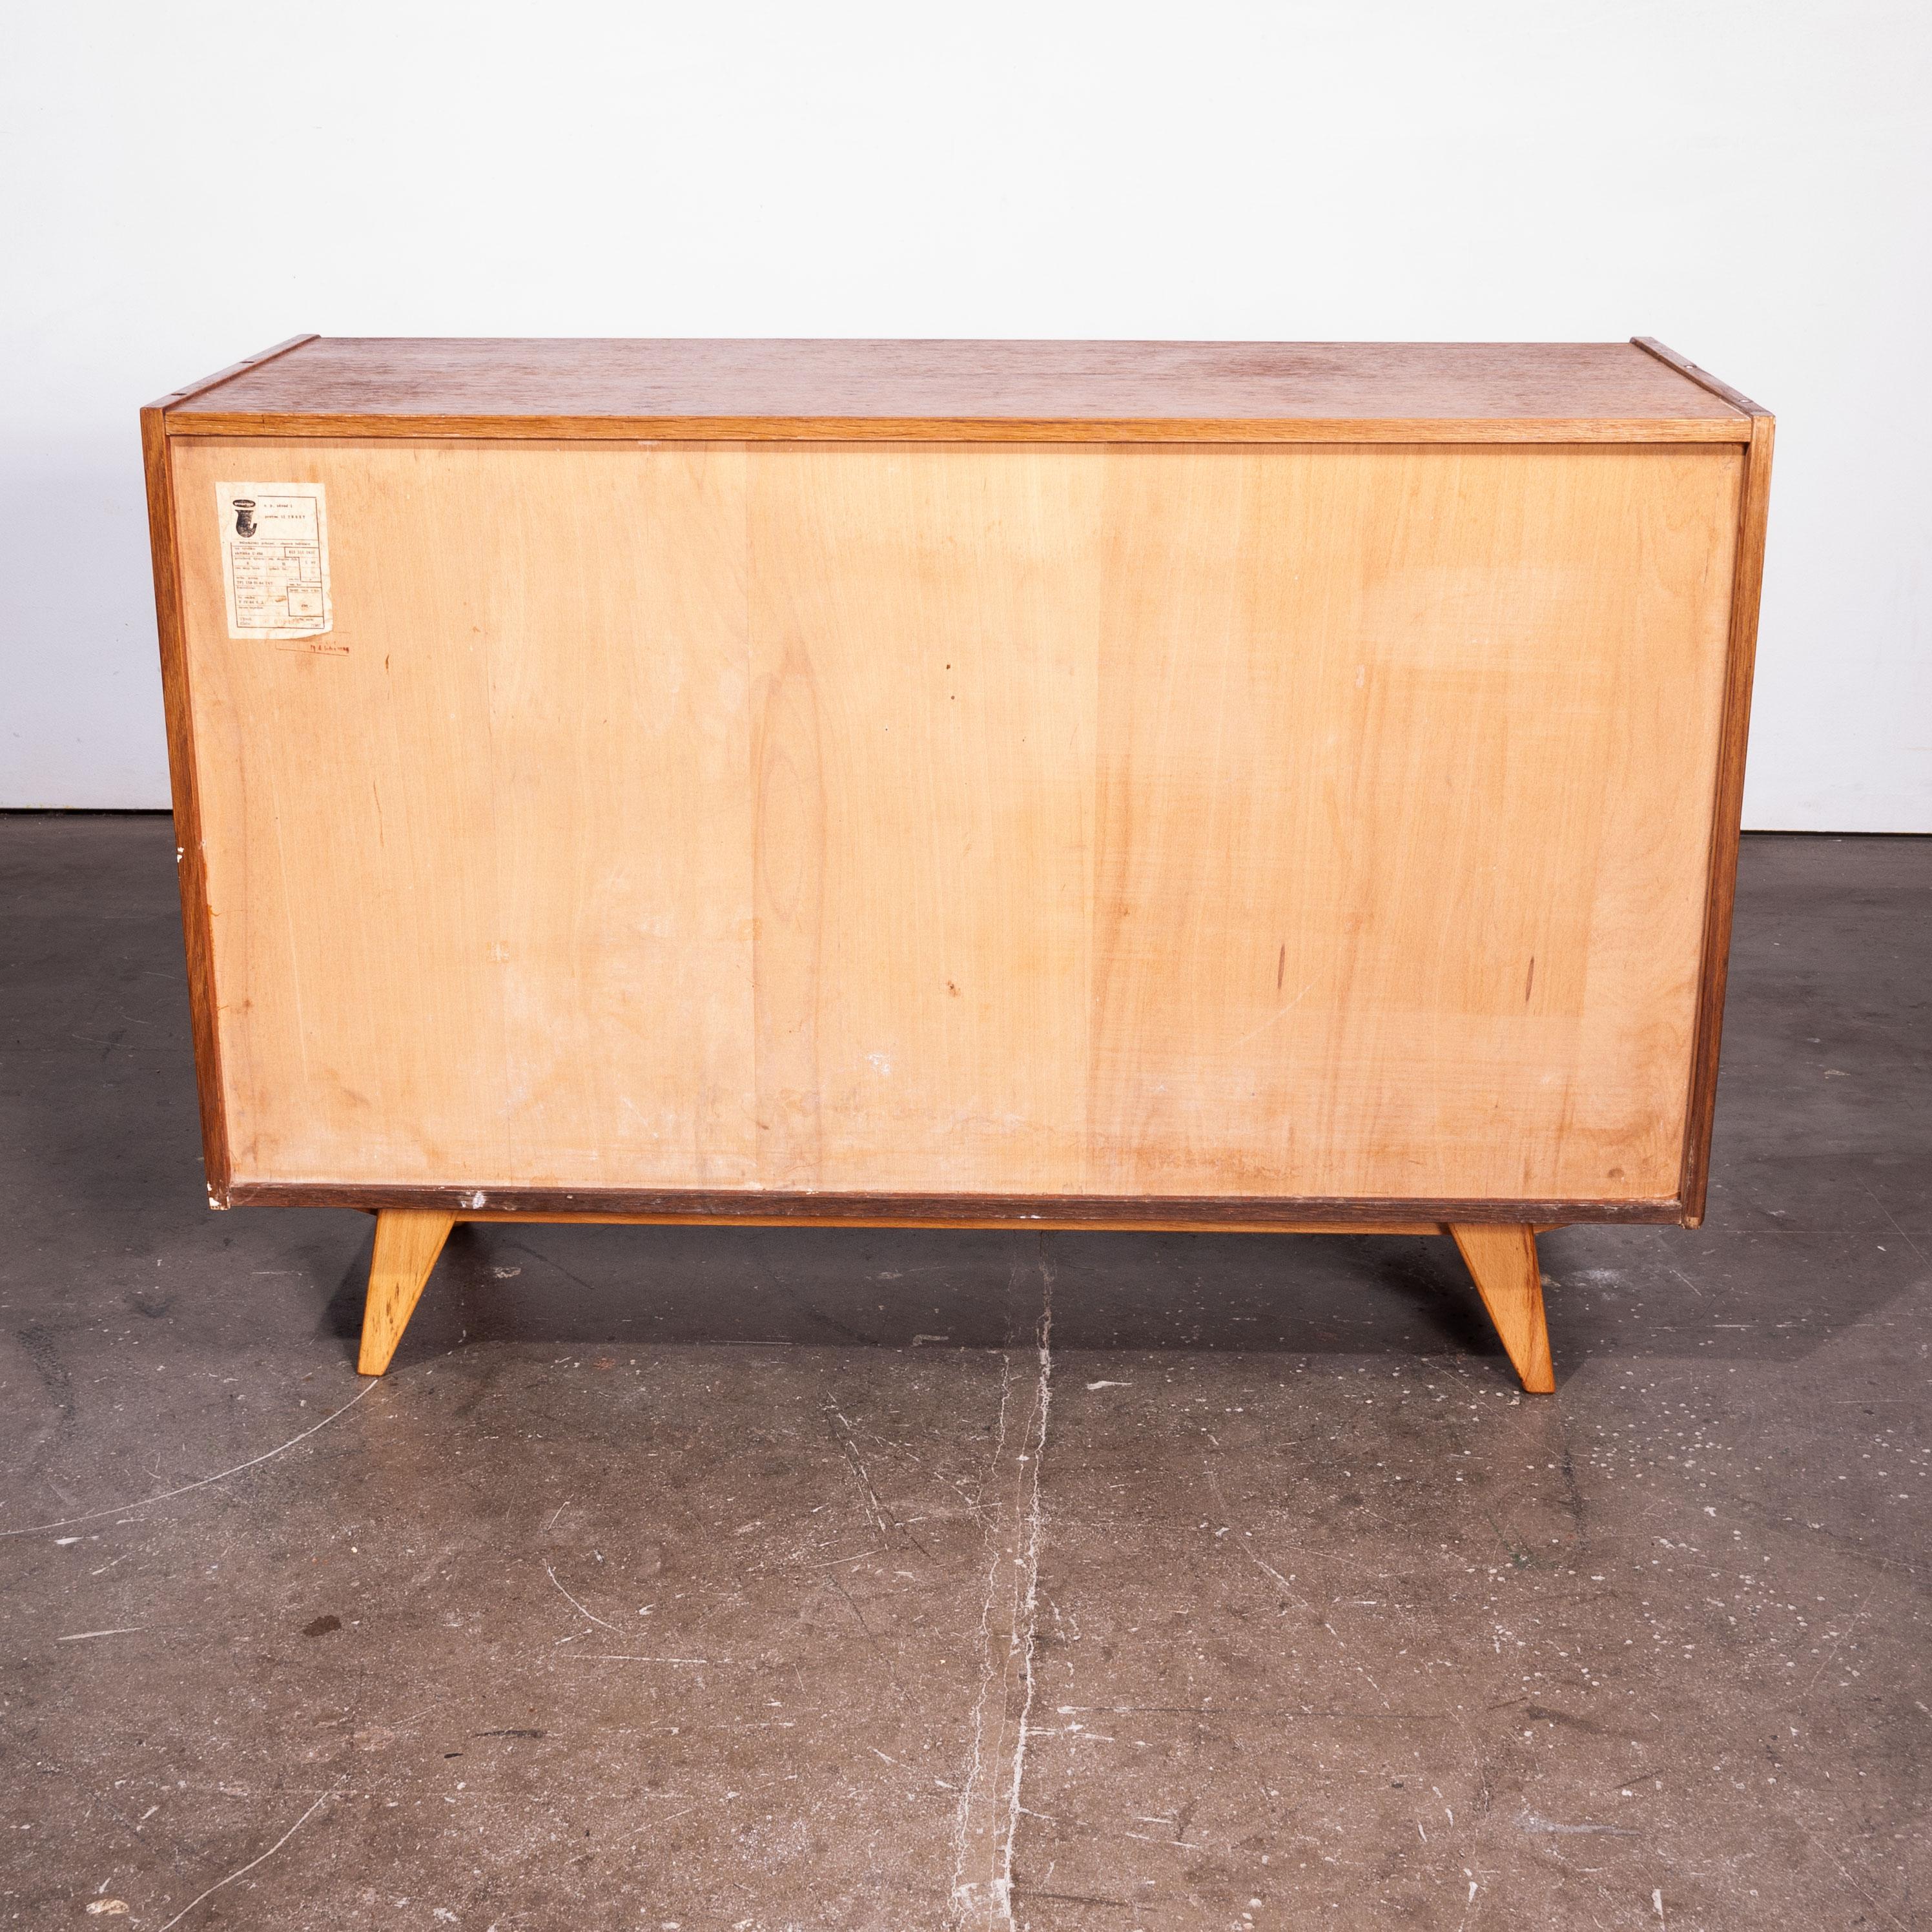 1950s Four Drawer Oak Chest Of Drawers / Cabinet  By Jiri Jiroutek For Interieu 1